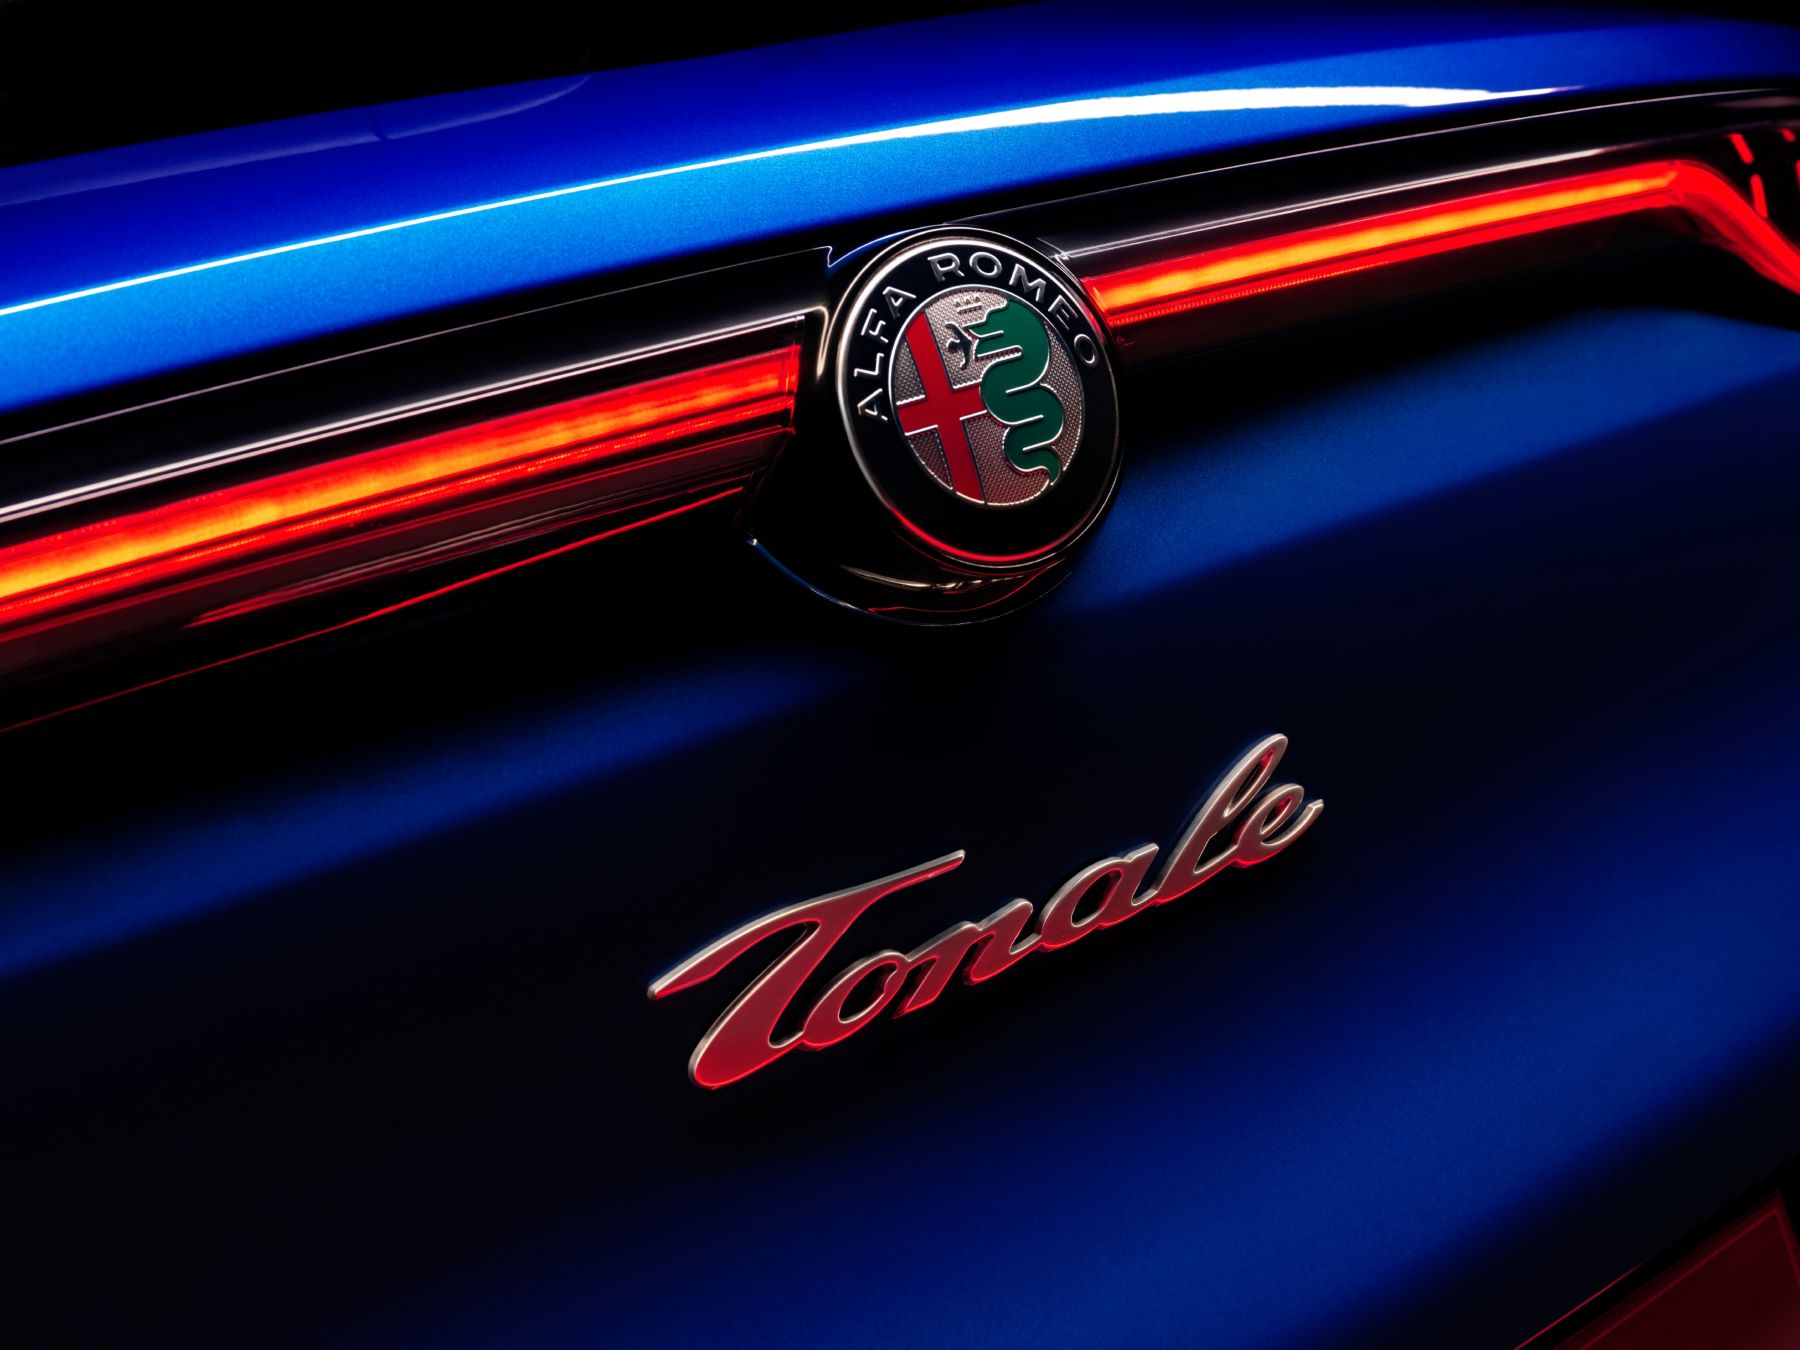 The logo and badging of an Alfa Romeo Tonale luxury plug-in hybrid electric vehicle (PHEV) model